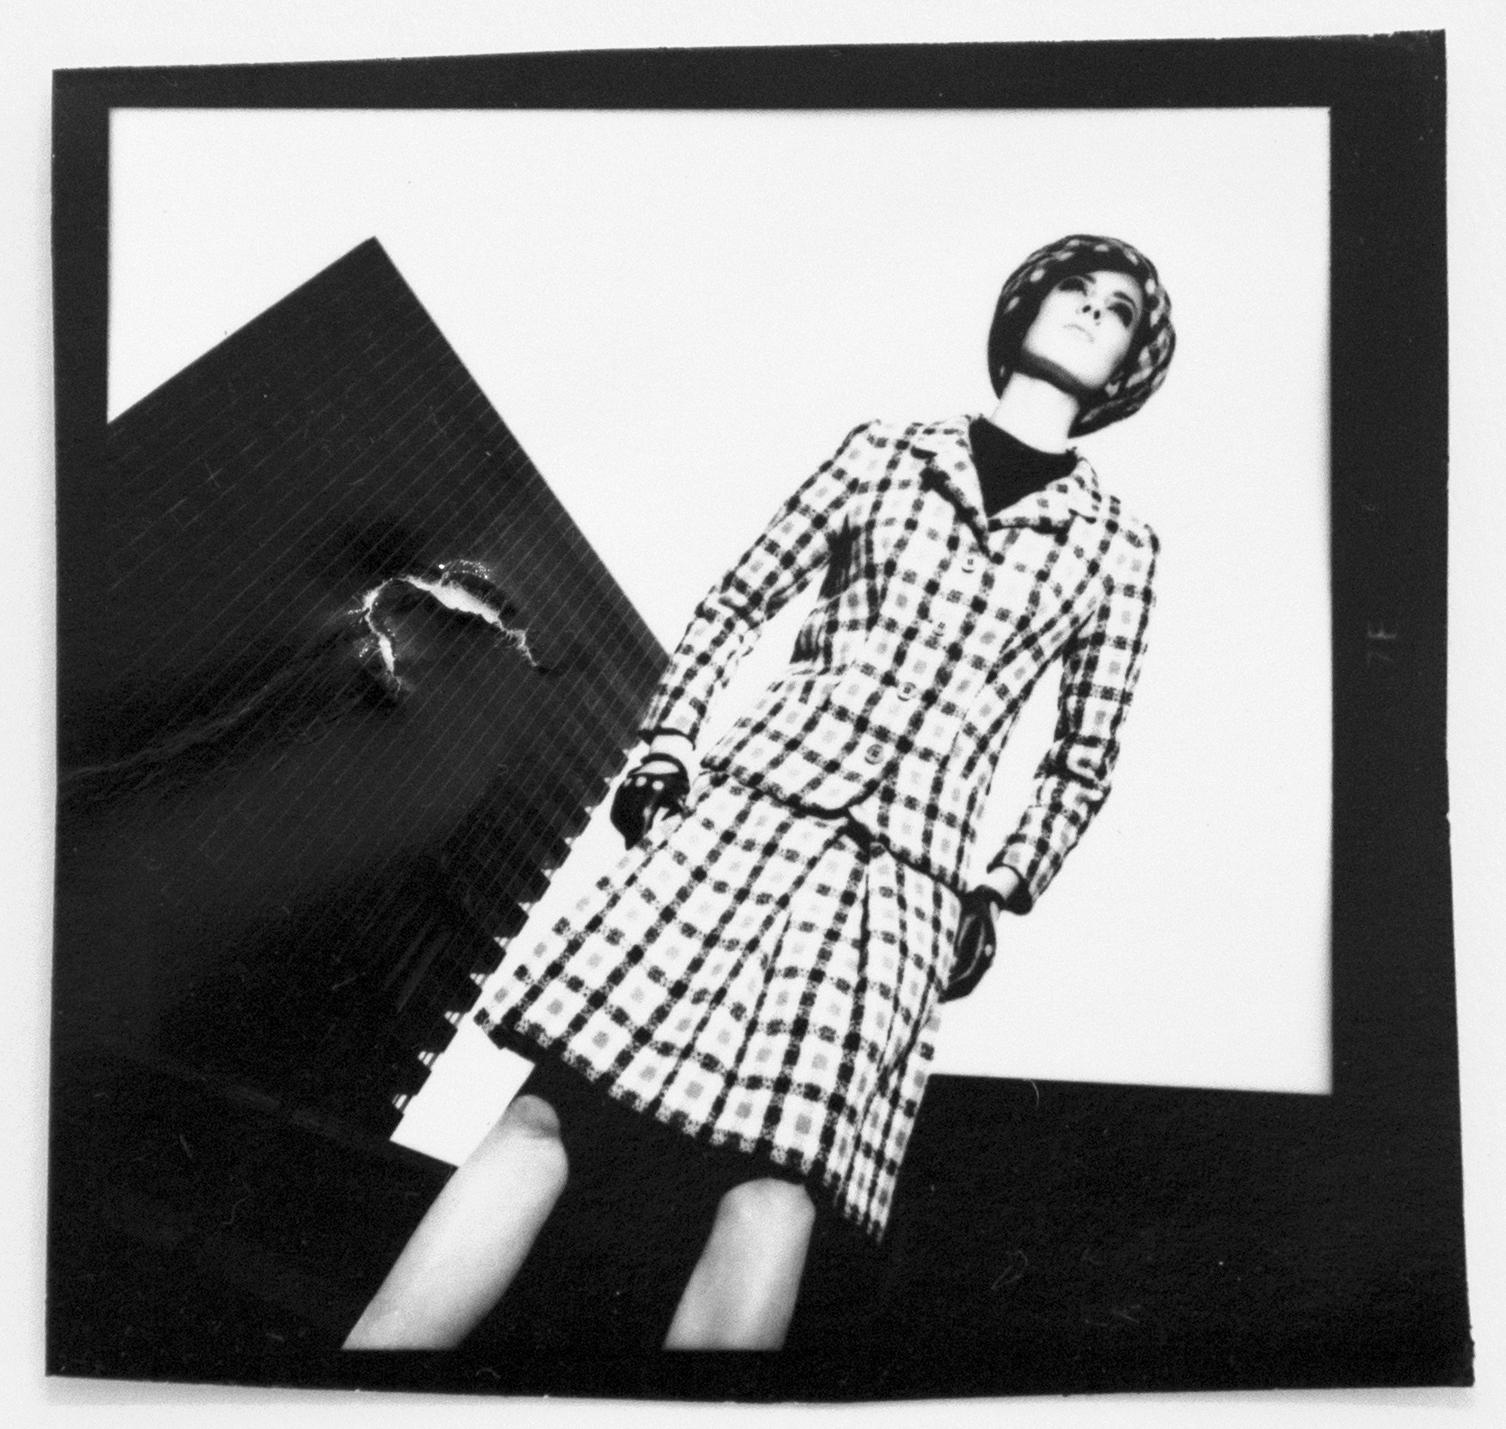 Moyra Swan, Advertising Shoot for Woollands, 1965 - Terence Donovan
Vintage silver gelatin contact print
Image size: 2.25 x 2.25 inches

Provenance: The Terence Donovan Archive

Born into a working class family in East London, Terence Donovan